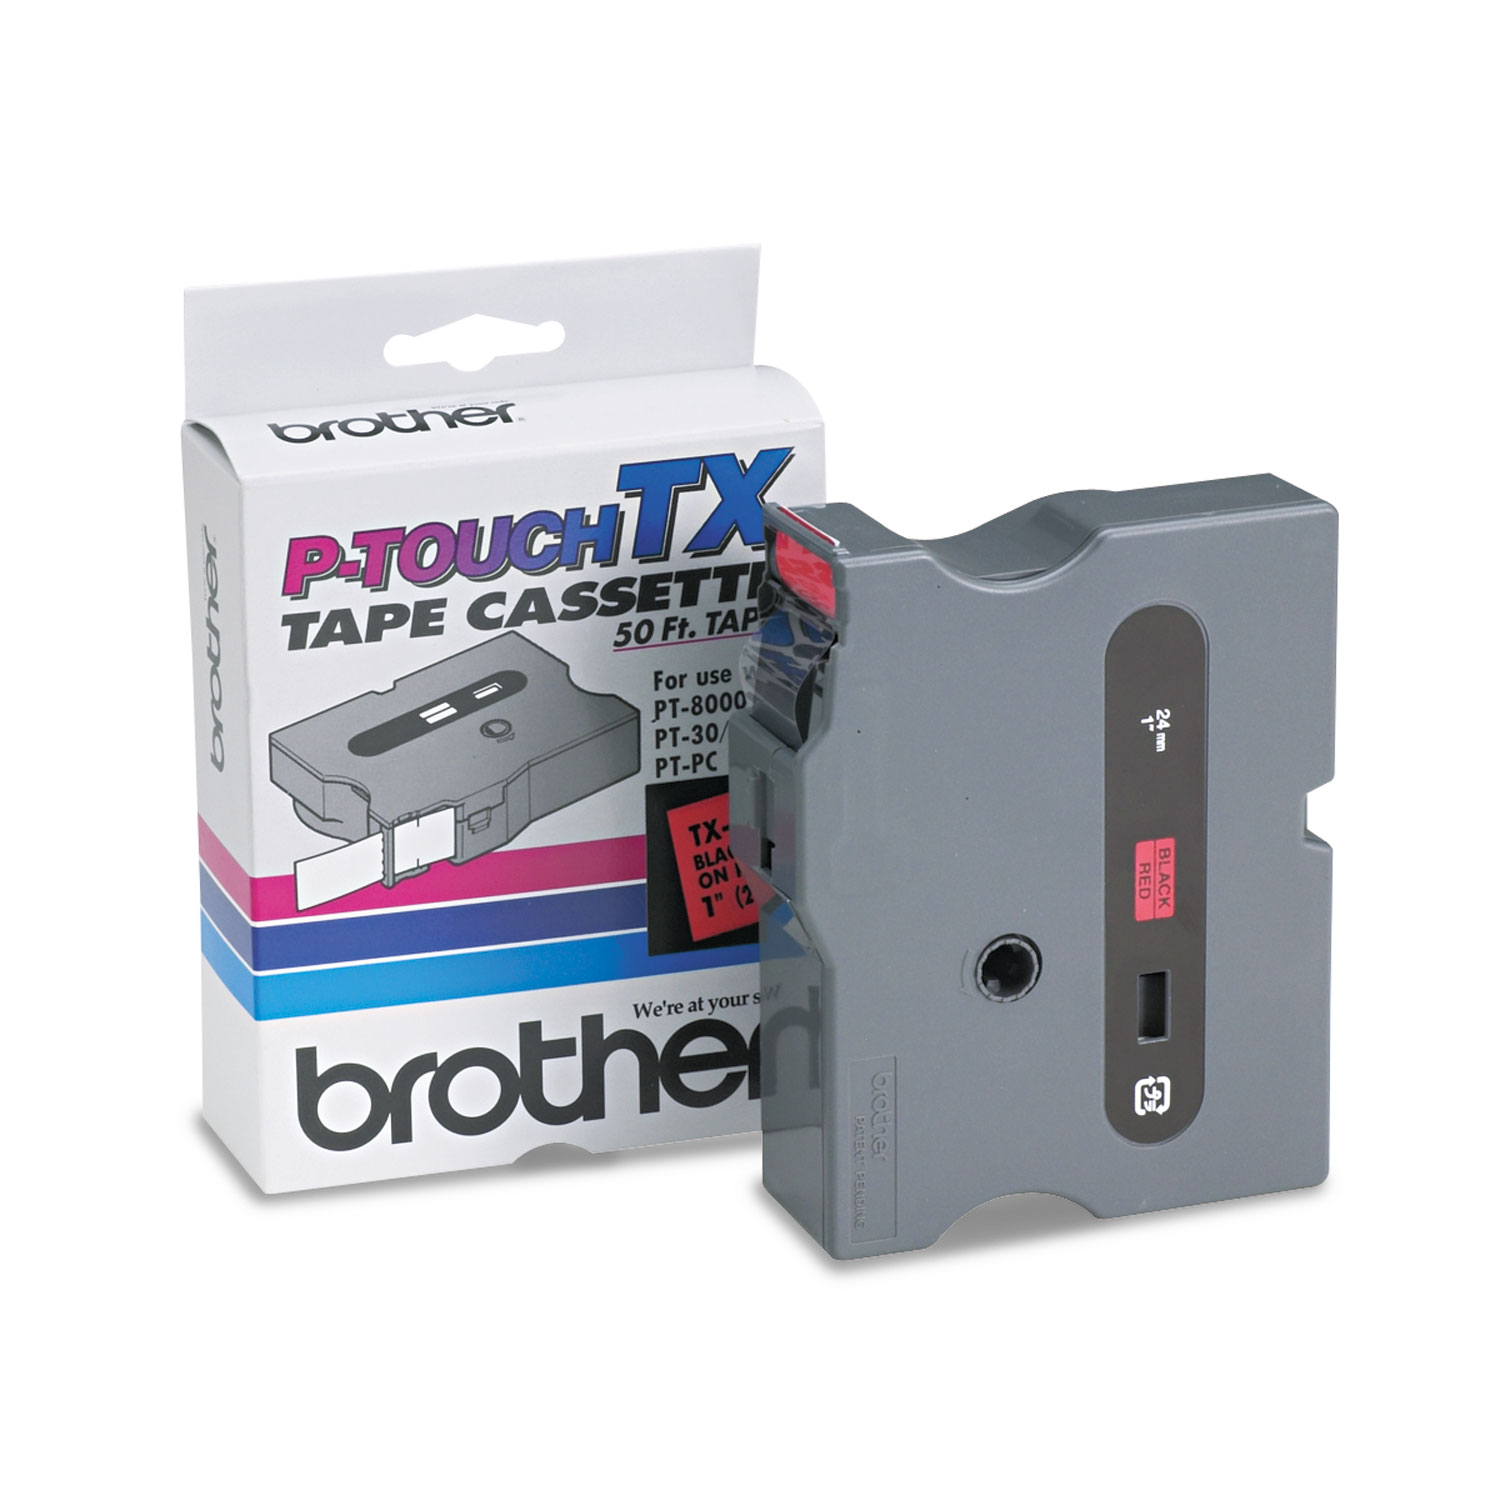  Brother P-Touch TX4511 TX Tape Cartridge for PT-8000, PT-PC, PT-30/35, 0.94 x 50 ft, Black on Red (BRTTX4511) 